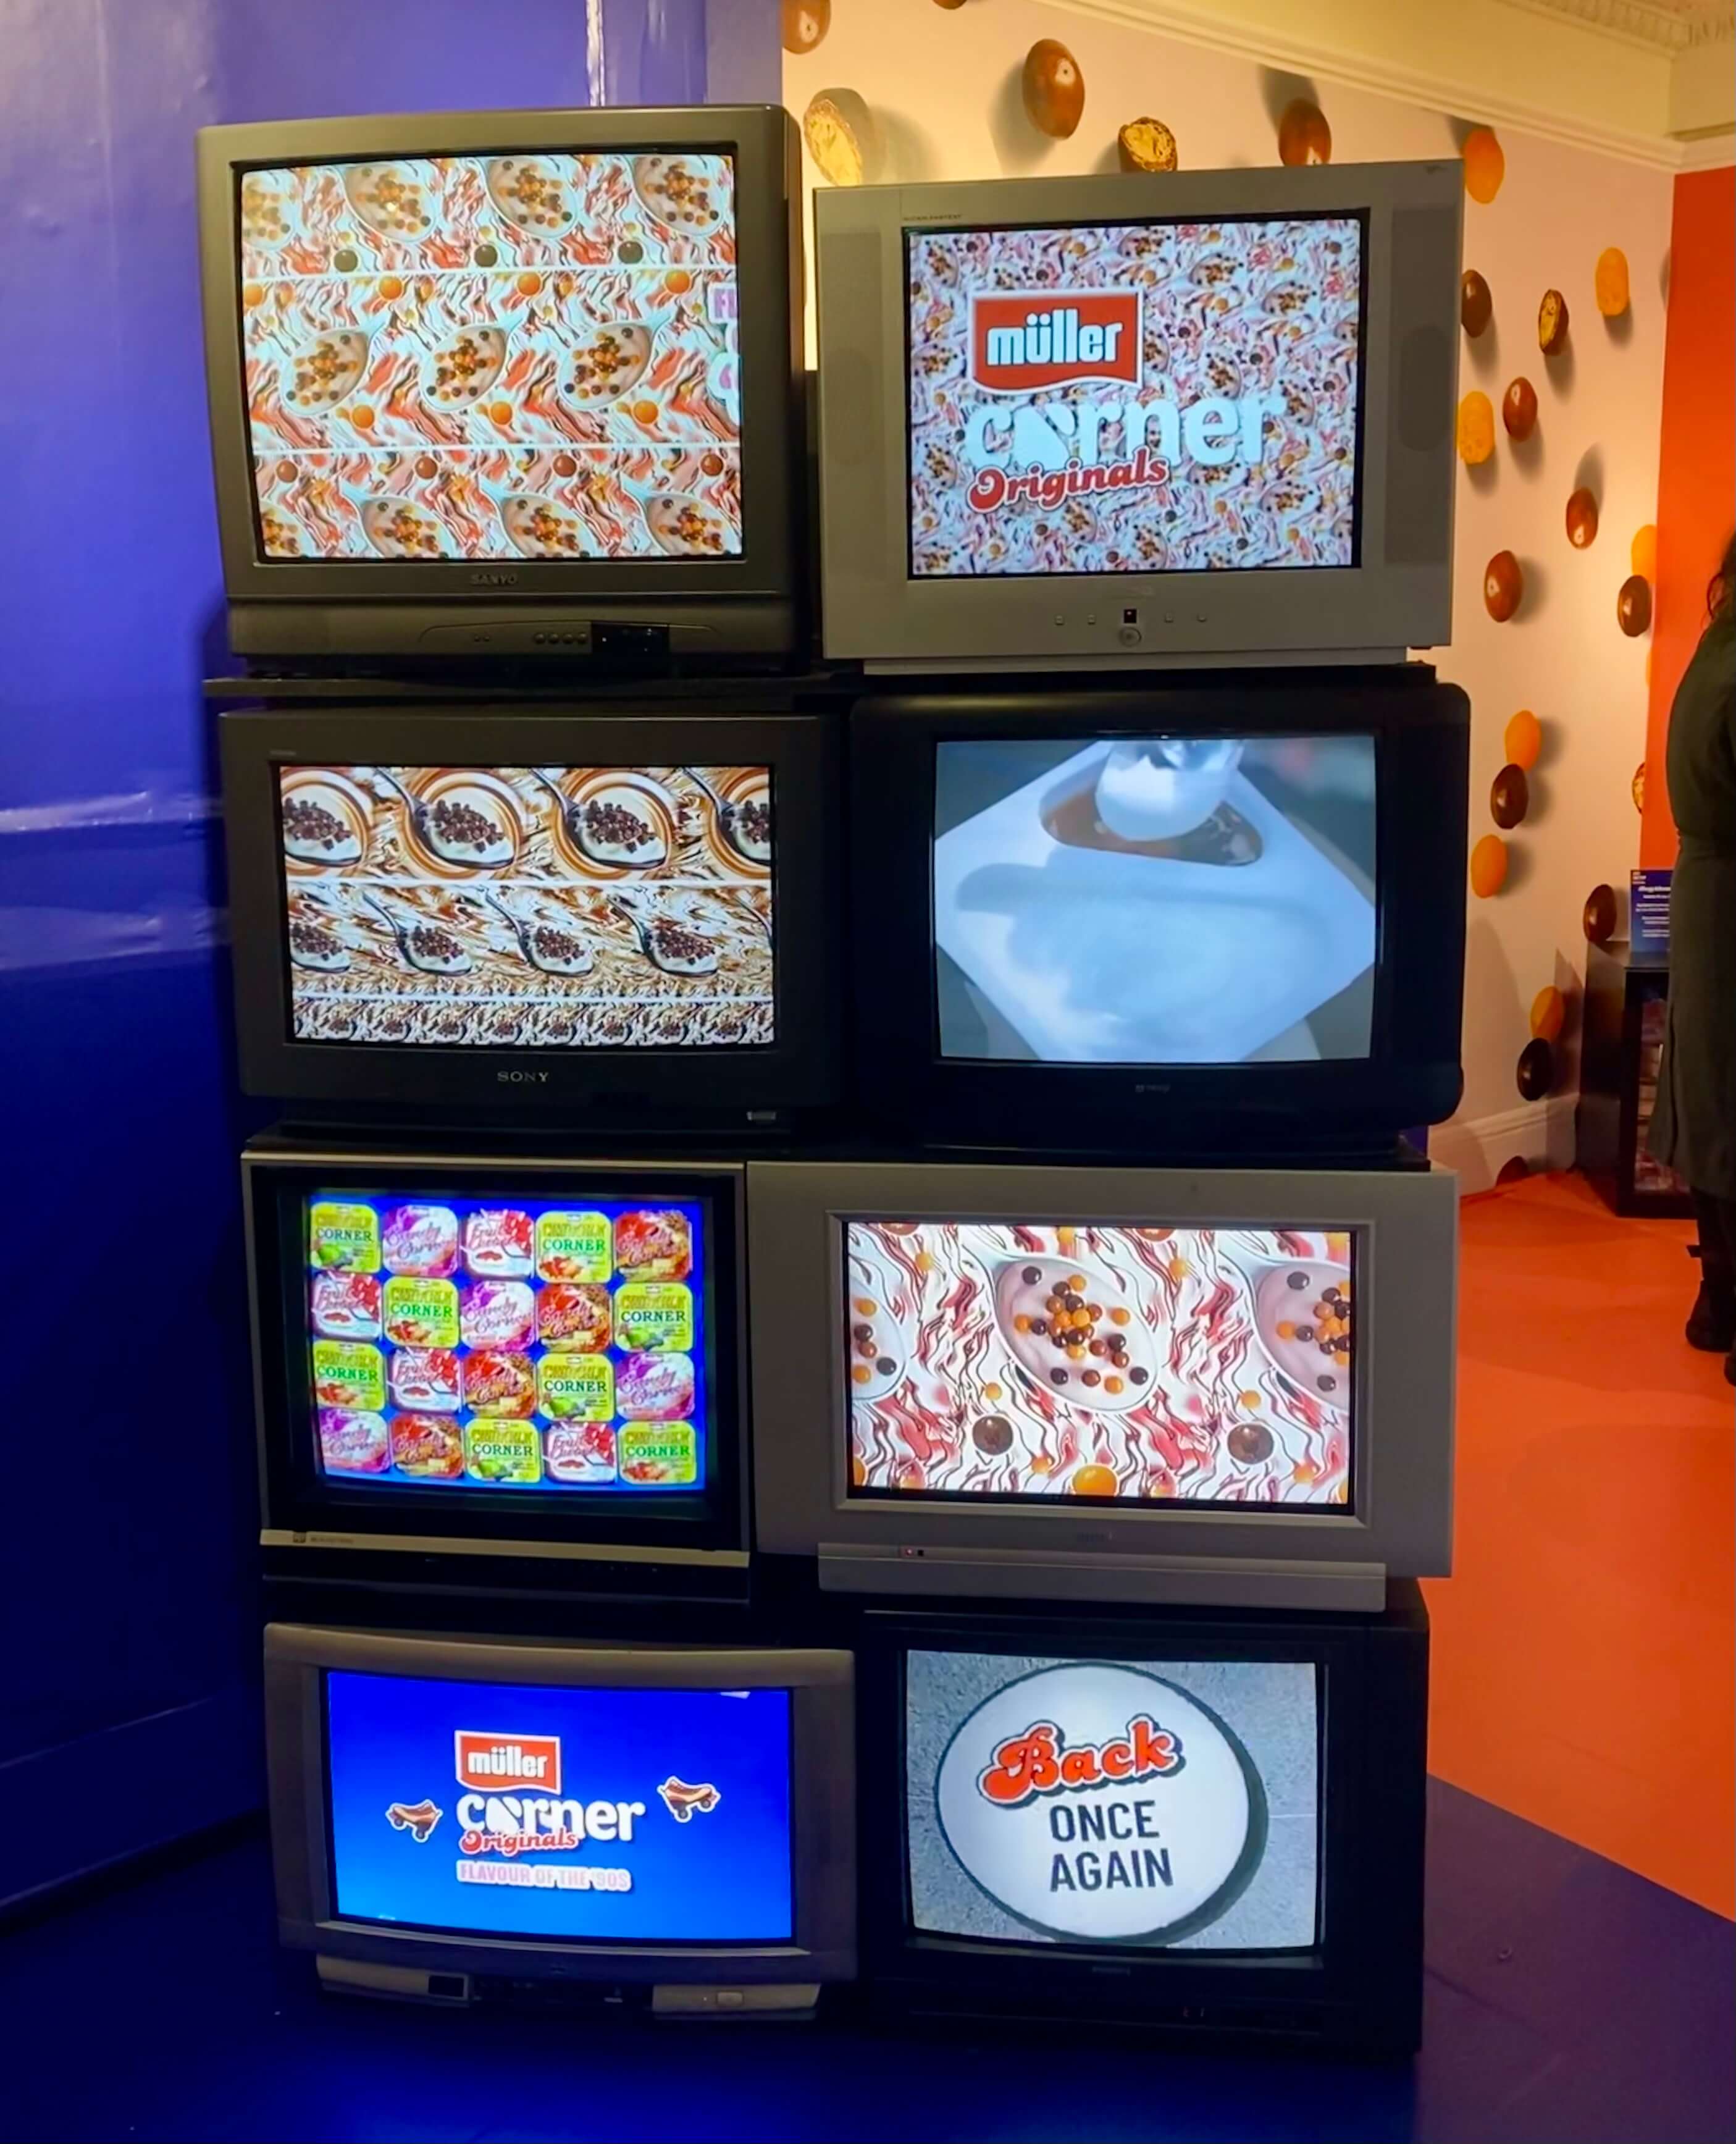 Vintage TV Stack Using 4:3 and WideScreen CRT Televisions